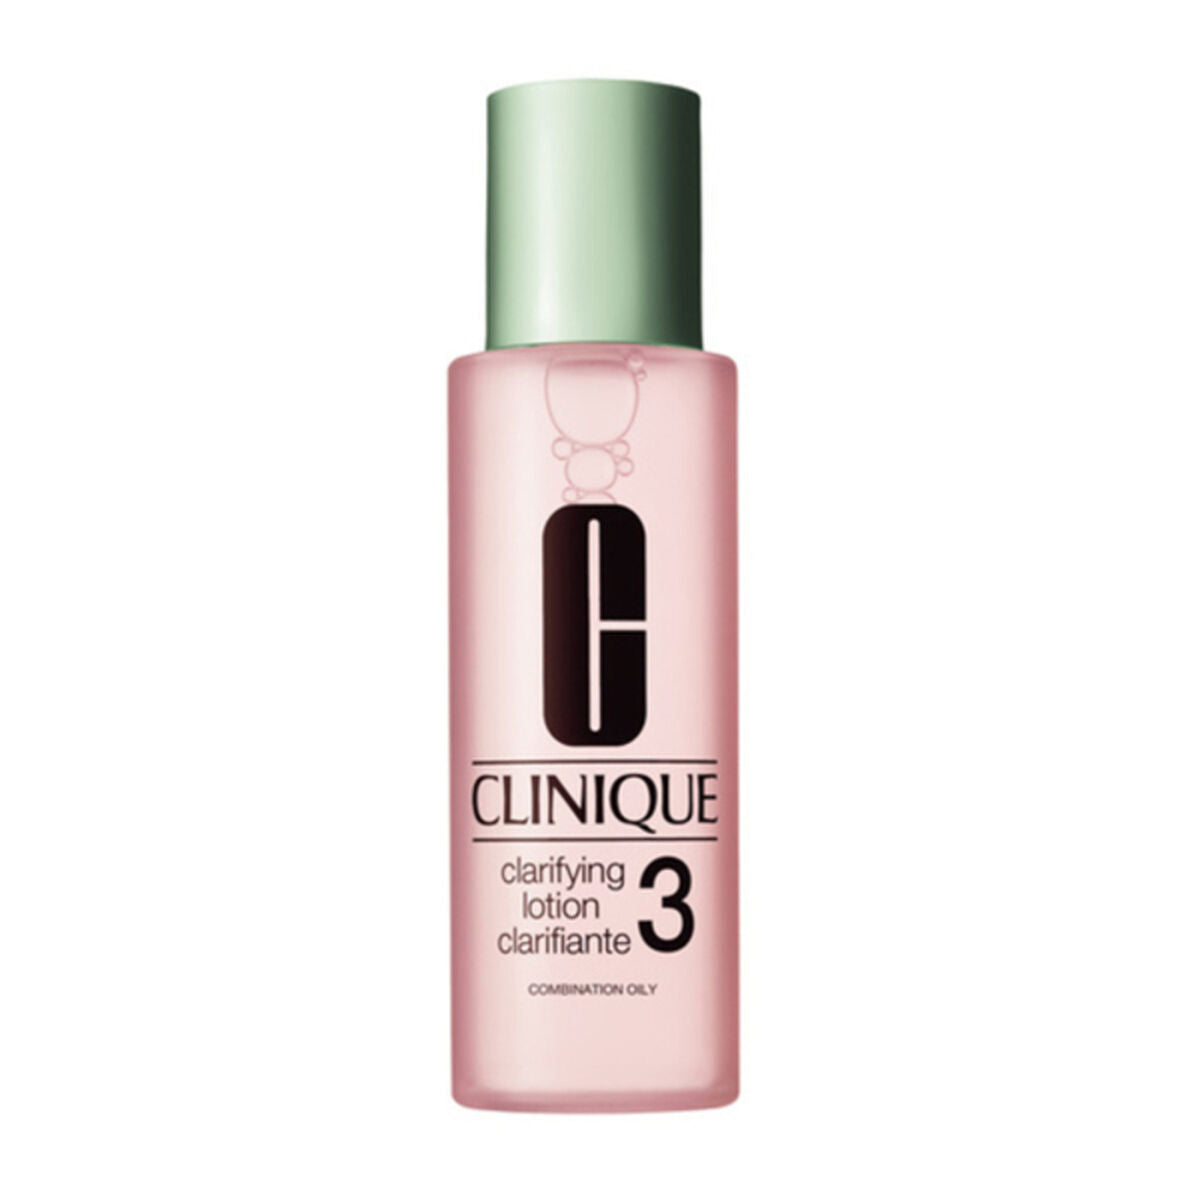 Toning Lotion Clarifying Clinique Oily skin-0